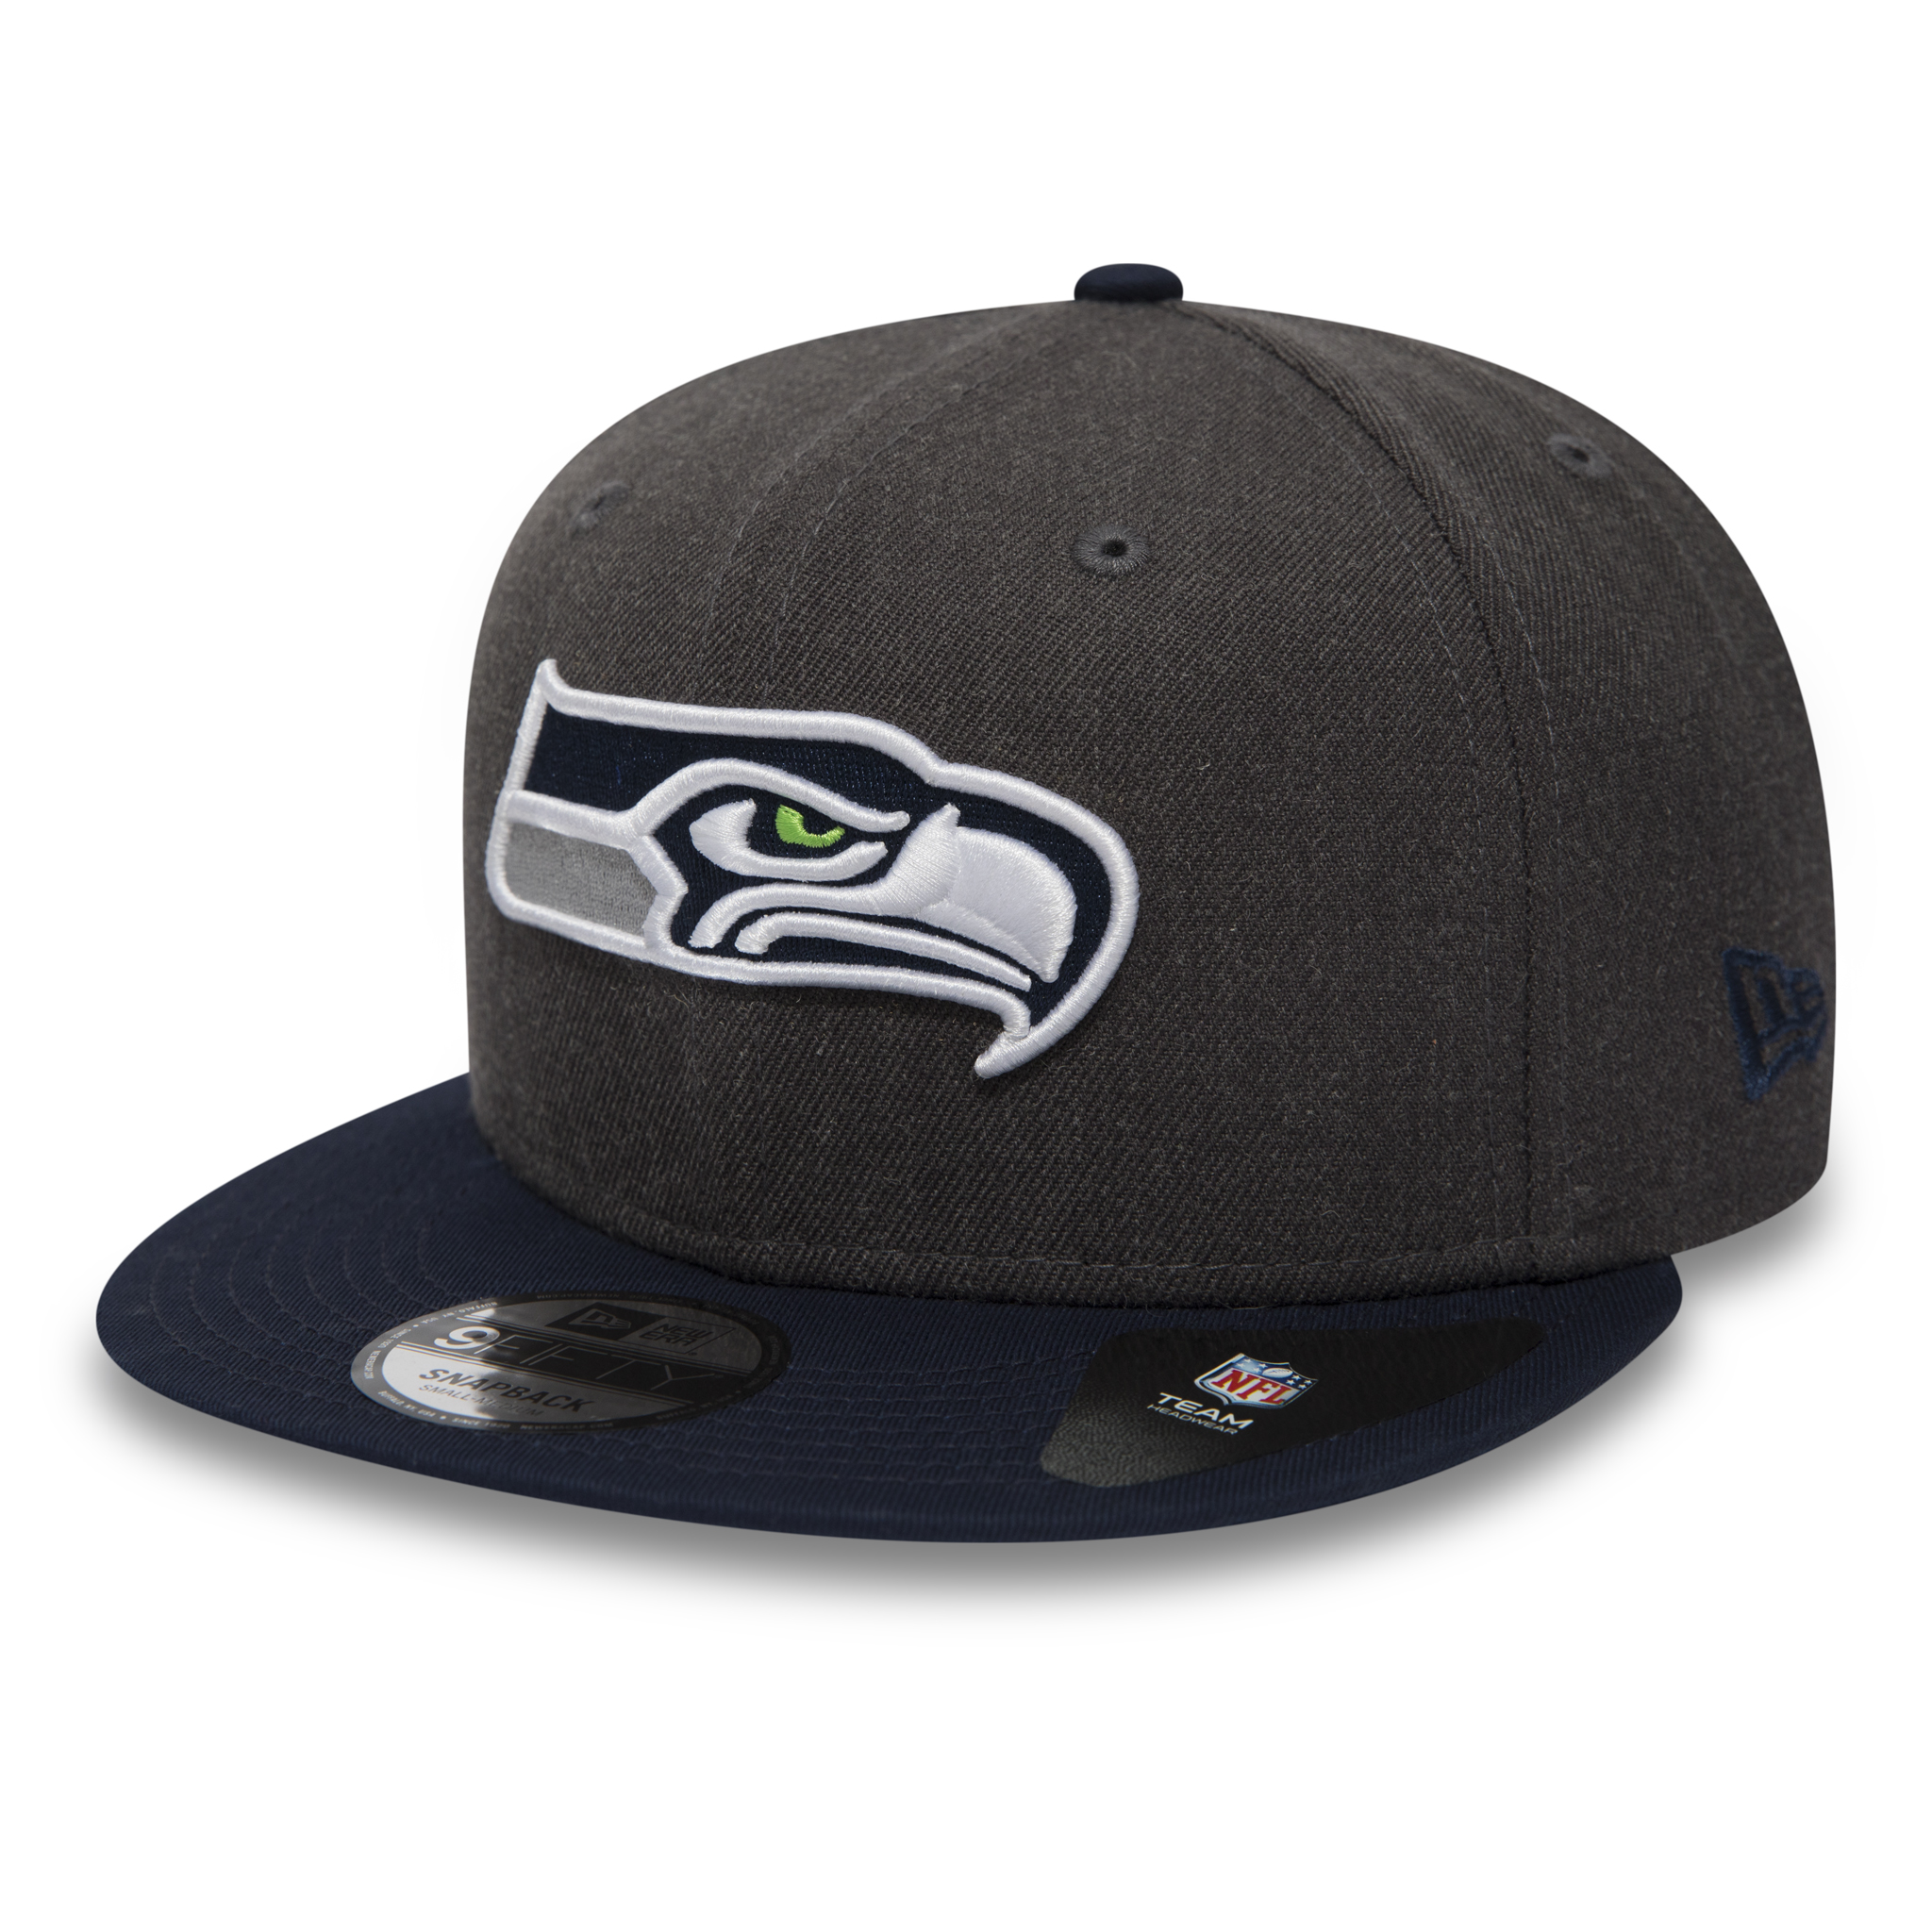 Seattle Seahawks Graphite 9FIFTY Cap